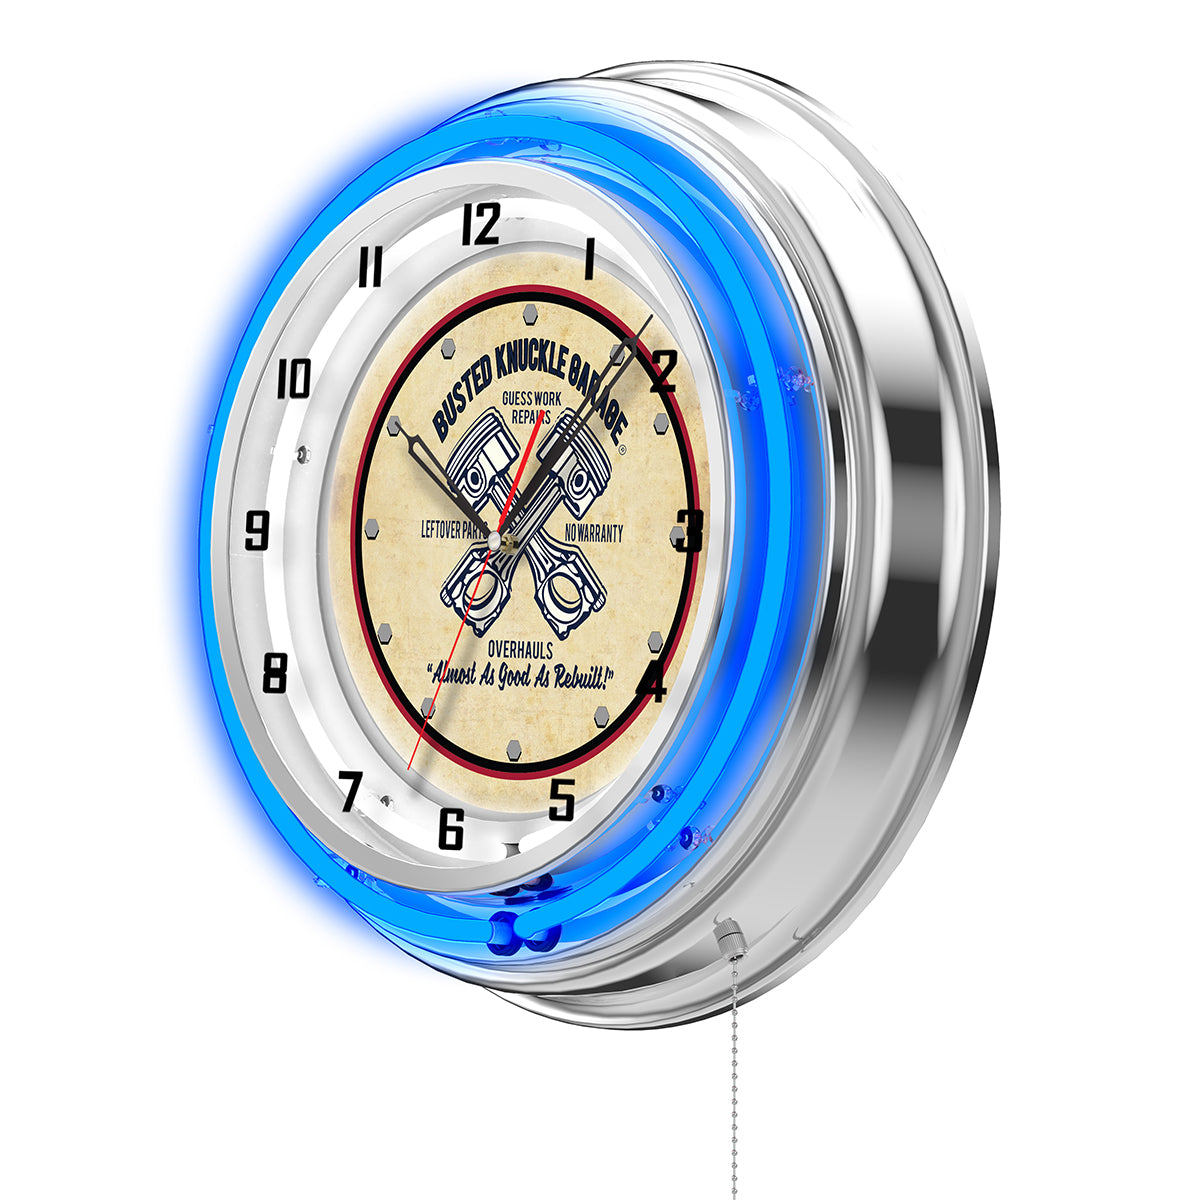 Busted Knuckle Garage Crossed Pistons Shop Clock - Blue Neon